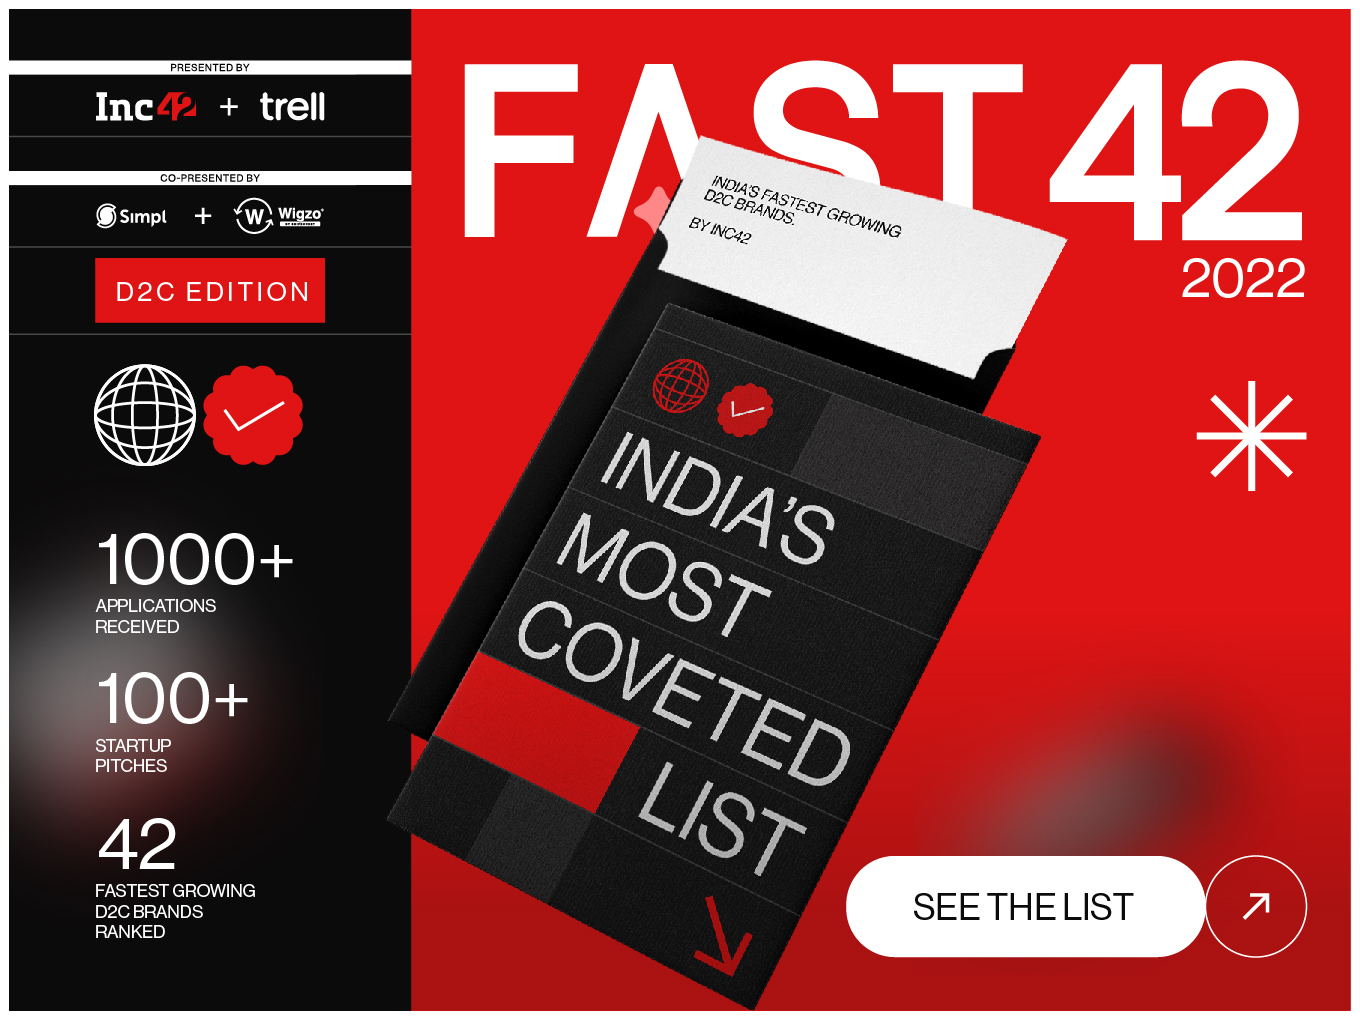 Unveiling Inc42's Inaugural List, FAST42 2022 – India’s Most Coveted List For D2C Brands